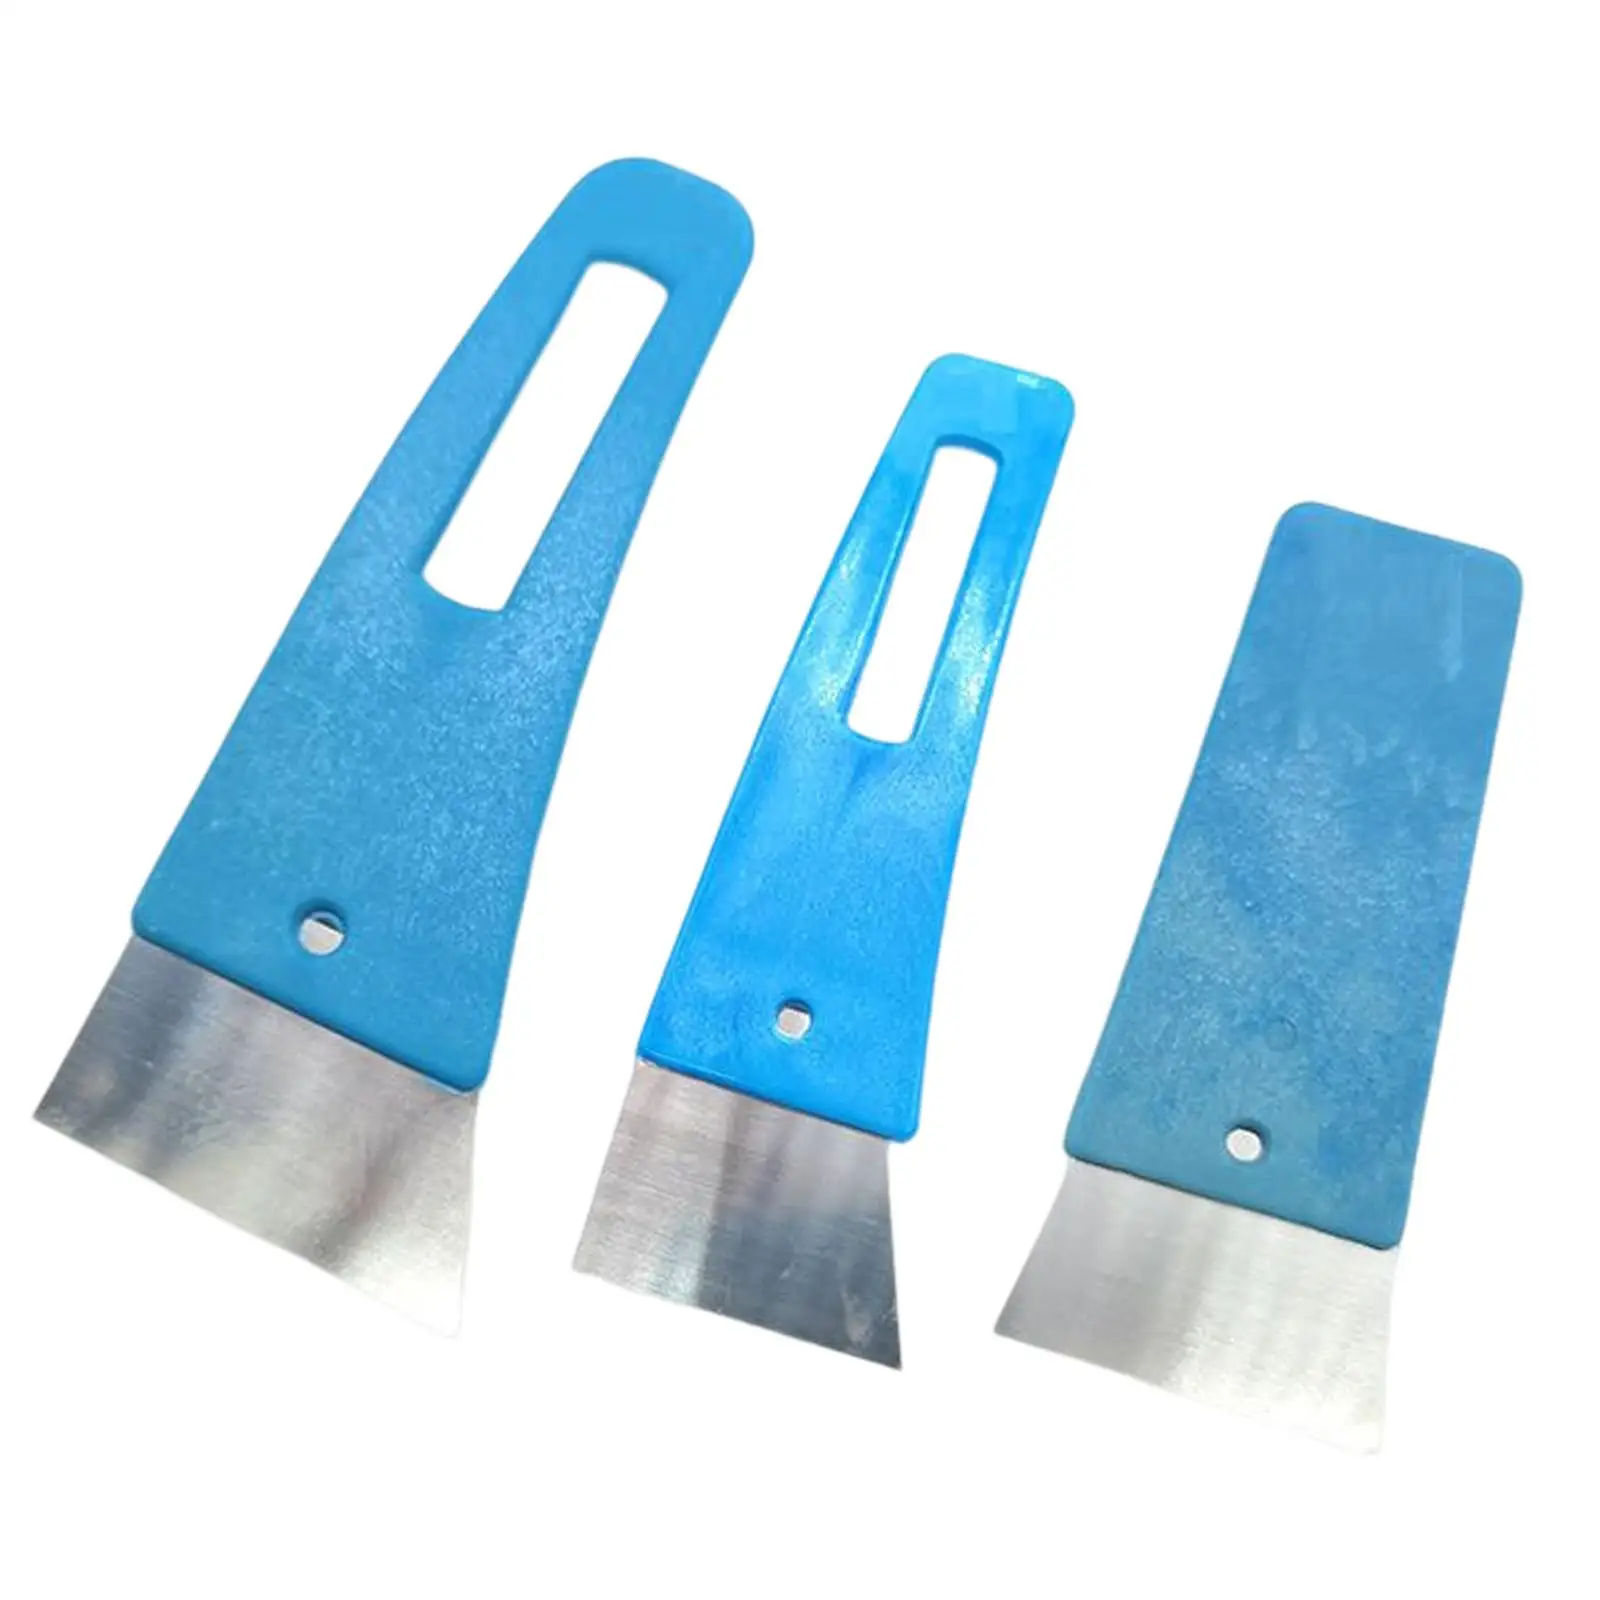 3 Pieces Car Window Film Scraper Squeegee Set Pushing Out Bubble Lines